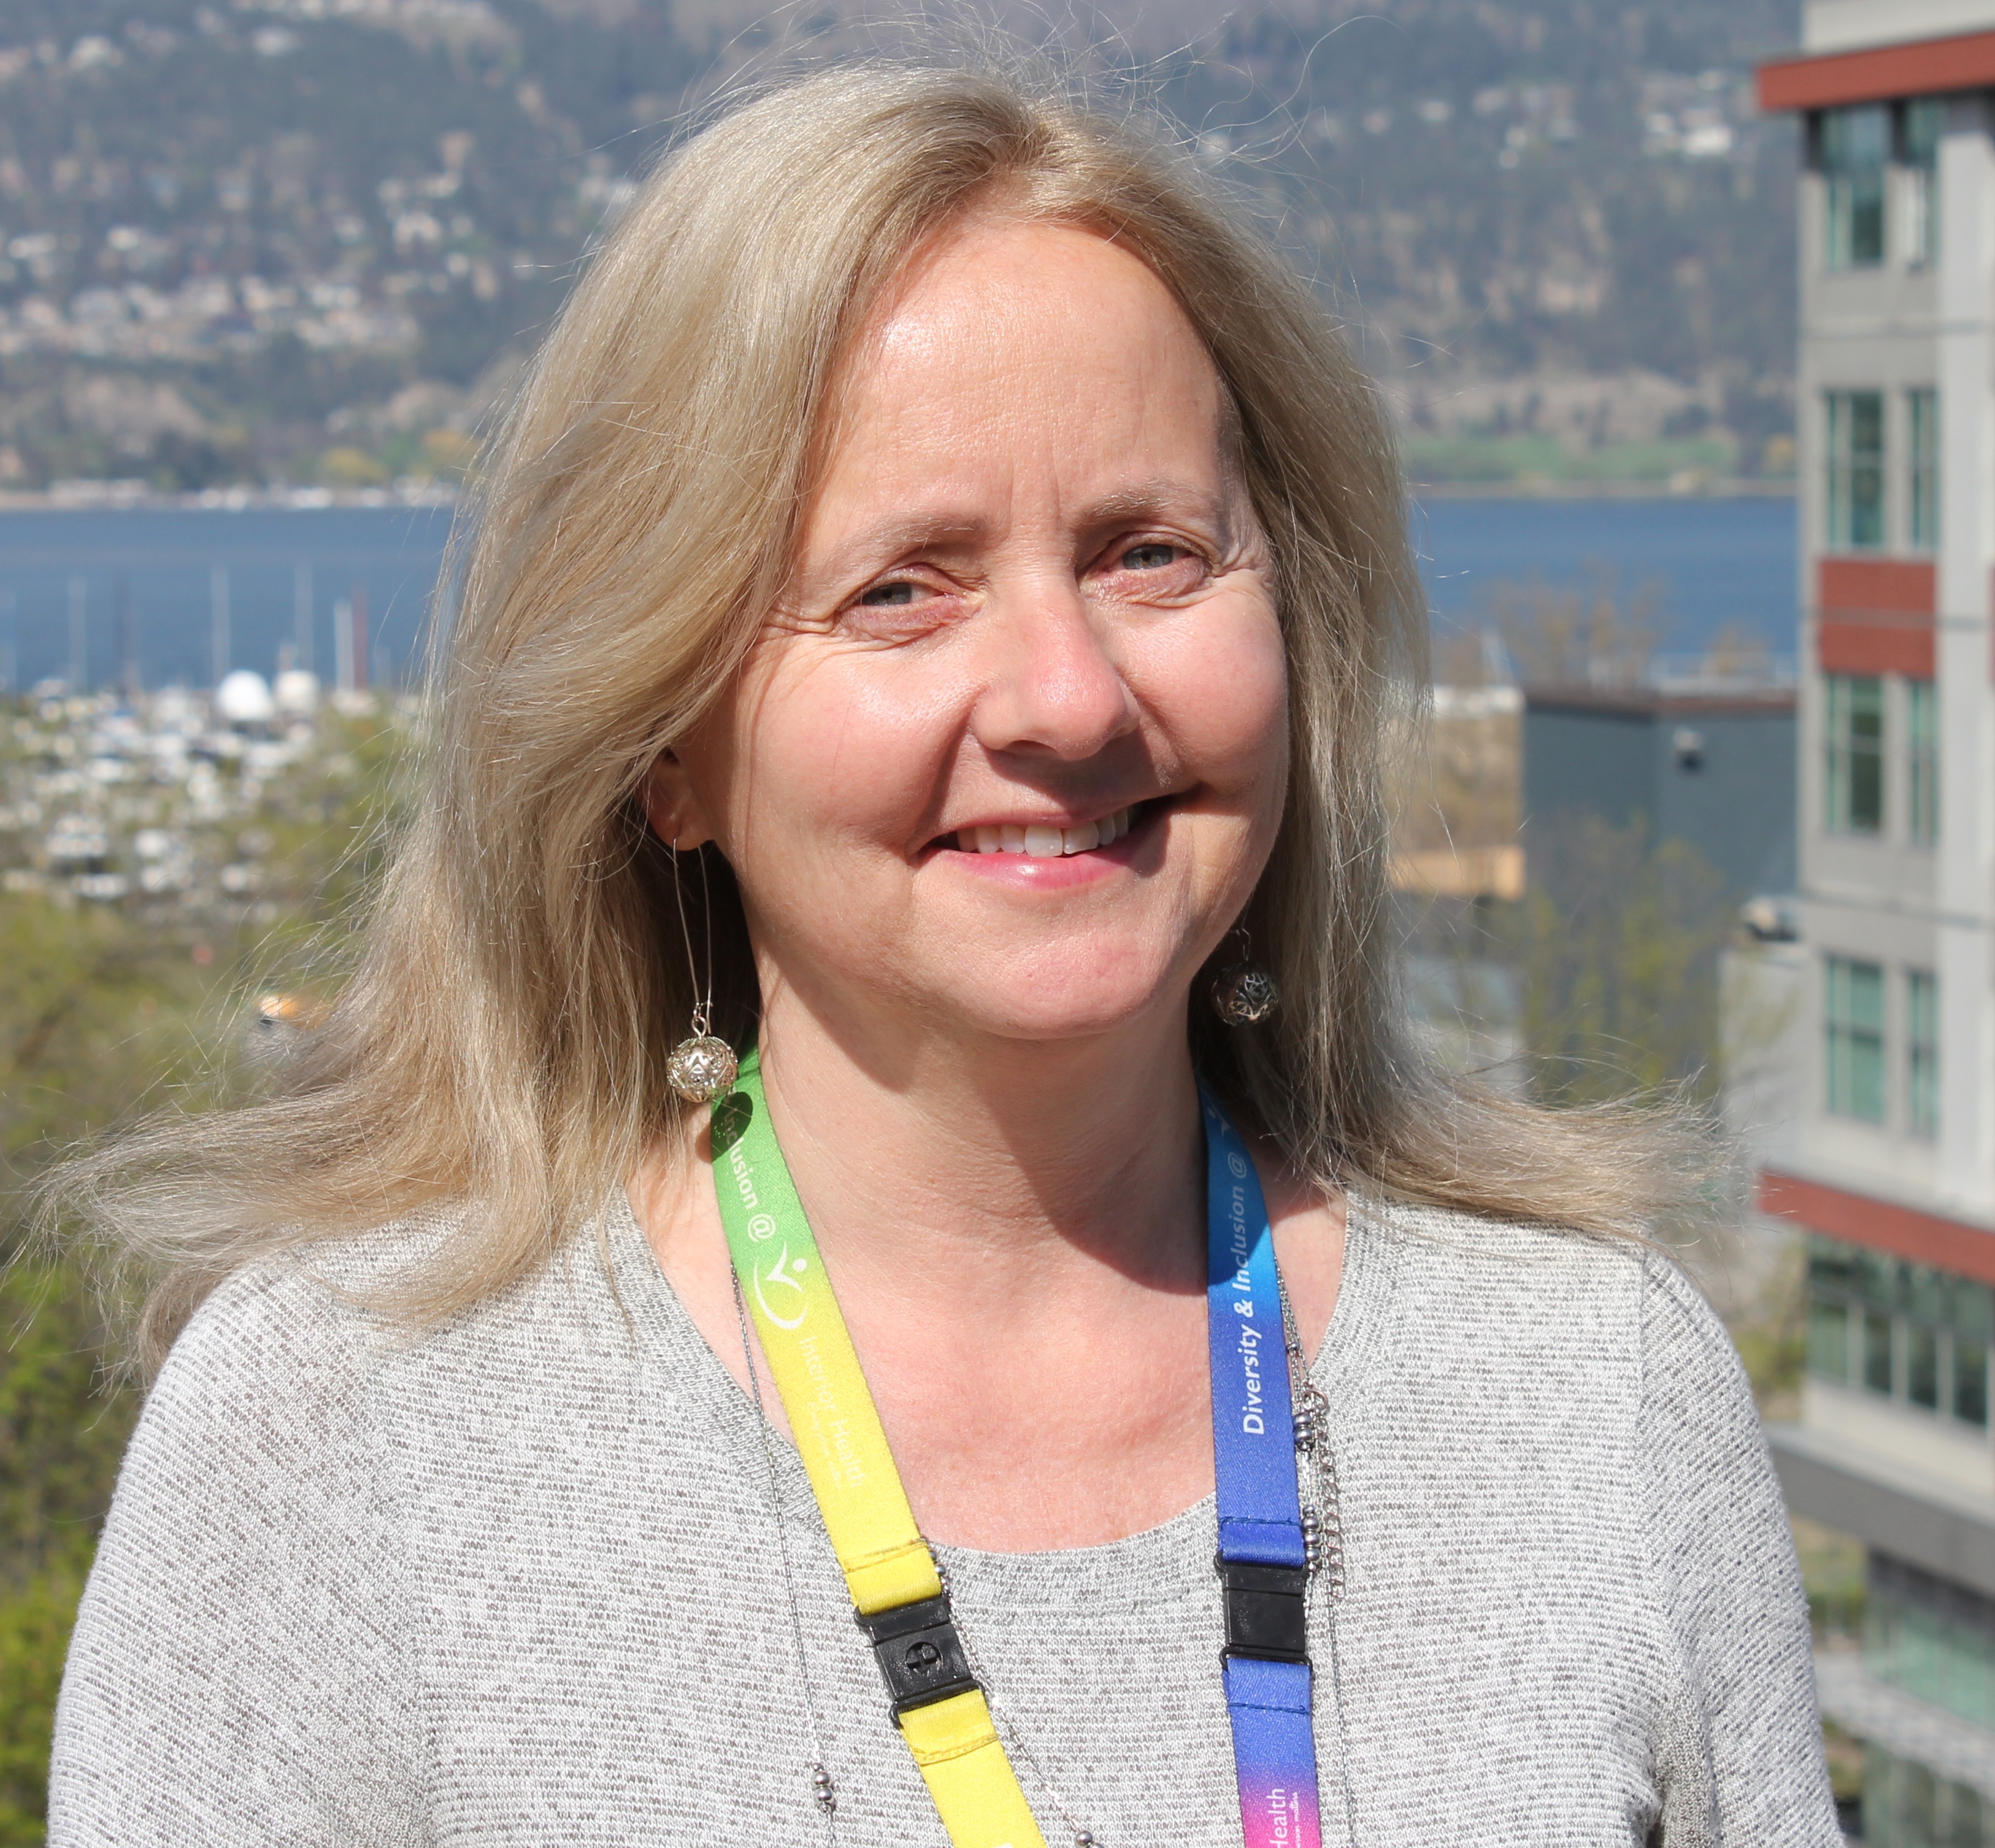 A smiling woman with blonde hair wearing a grey shirt and multi-coloured lanyard poses for a picture with a large building, water and mountains in the background.